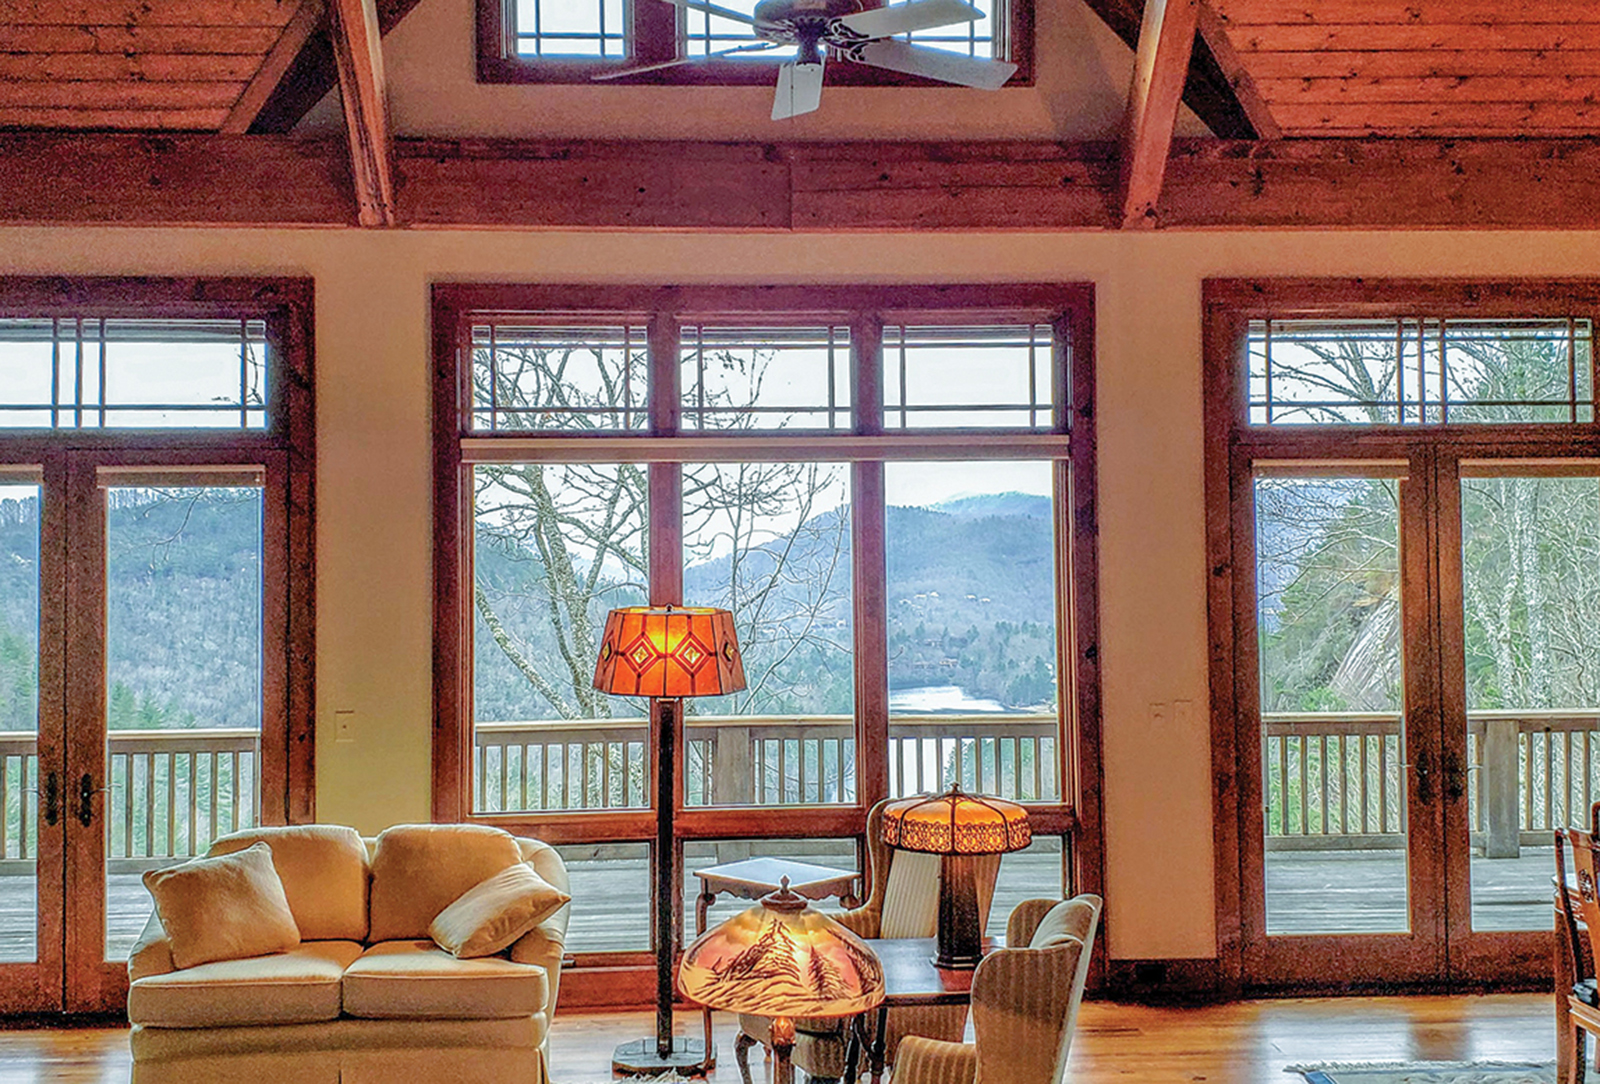 Home for sale in Sapphire Valley NC - Interior